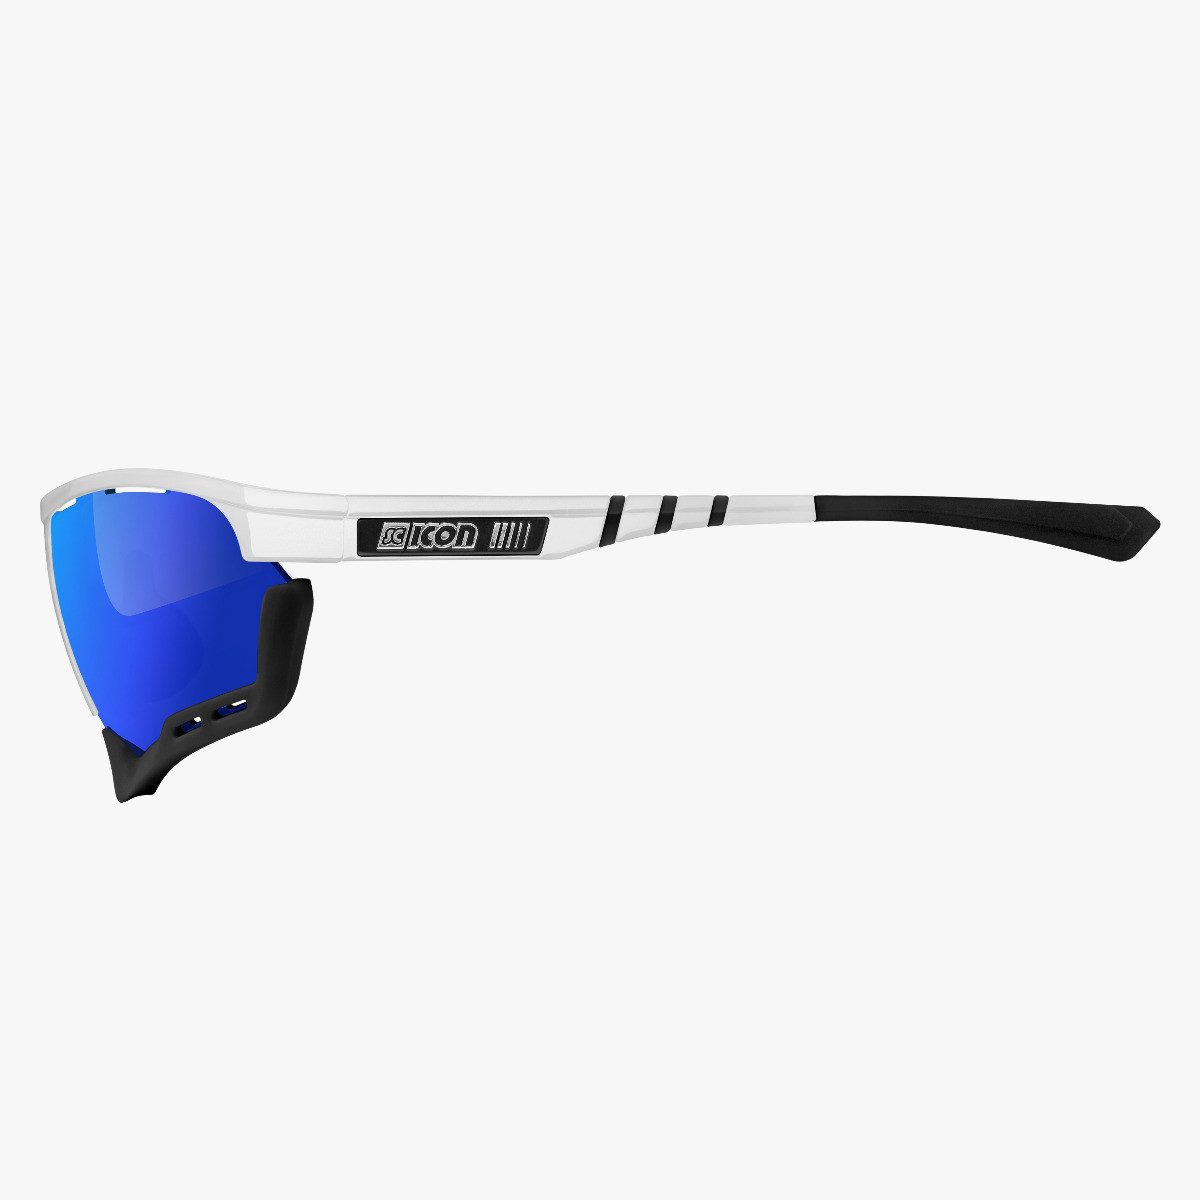 Scicon Sports | Aerocomfort Sport Cycling Performance Sunglasses - White / Blue - EY15030402
